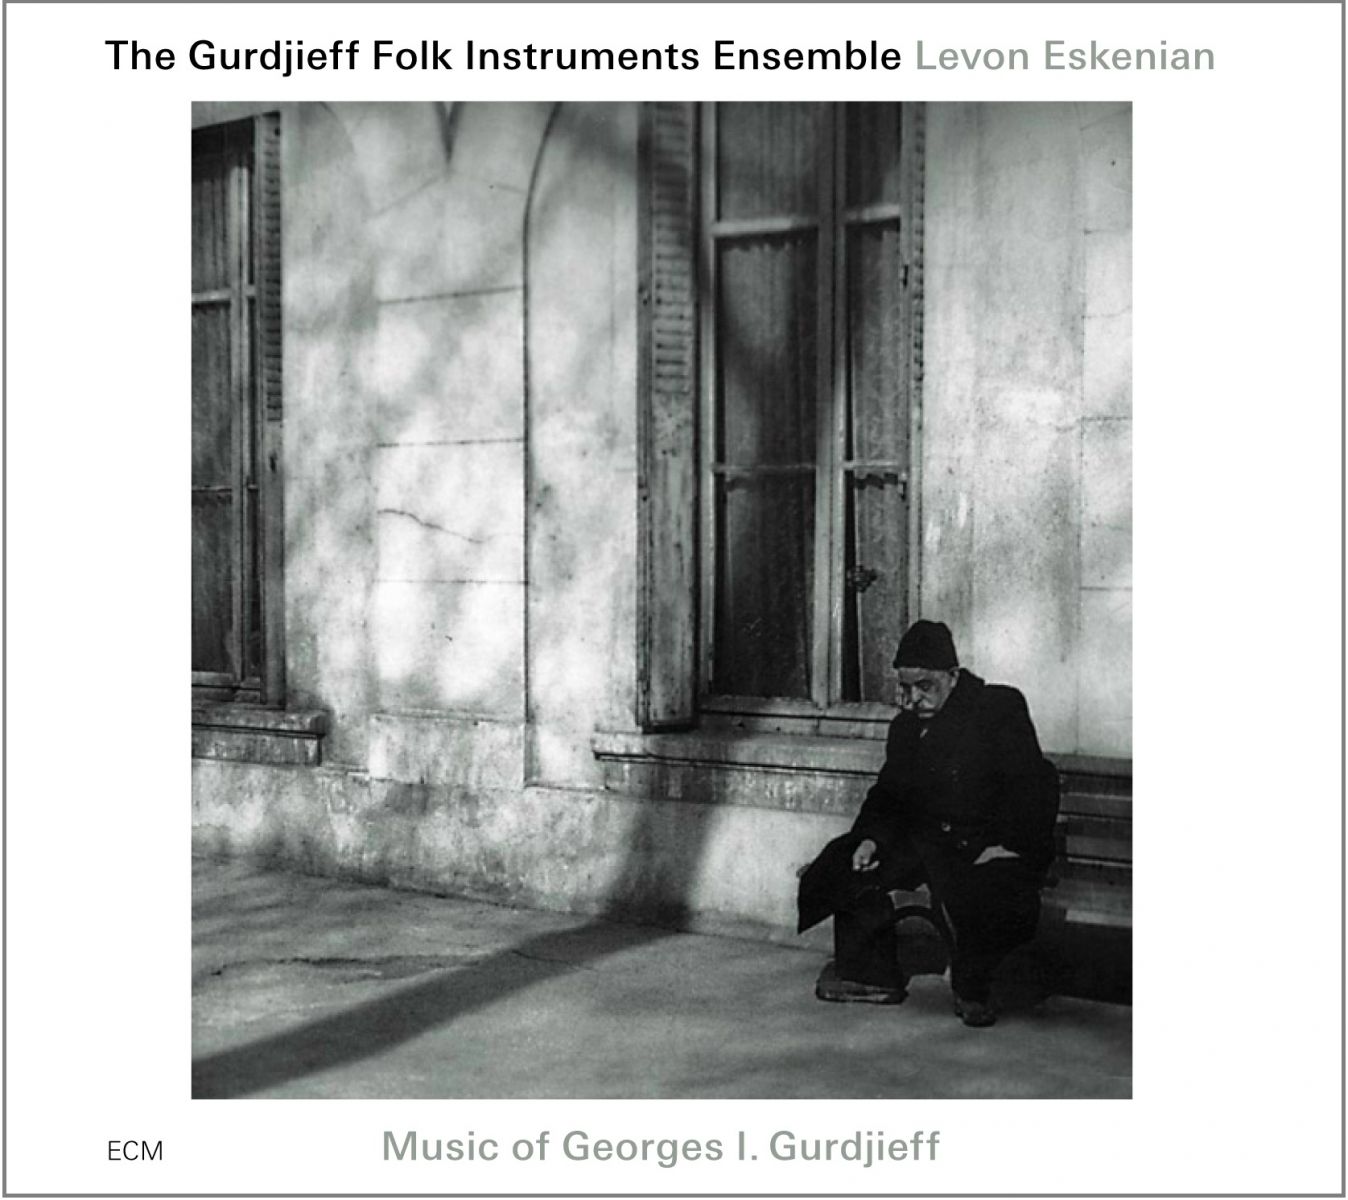 The Gurdjieff Ensemble’s debut album “Music of Georges I. Gurdjieff,” issued by ECM in 2011 was awarded the Dutch Edison’s Award among others, for its innovative recasting of Gurdjieff’s piano pieces for traditional folk instruments. (Image courtesy of the Gurdjieff Ensemble)